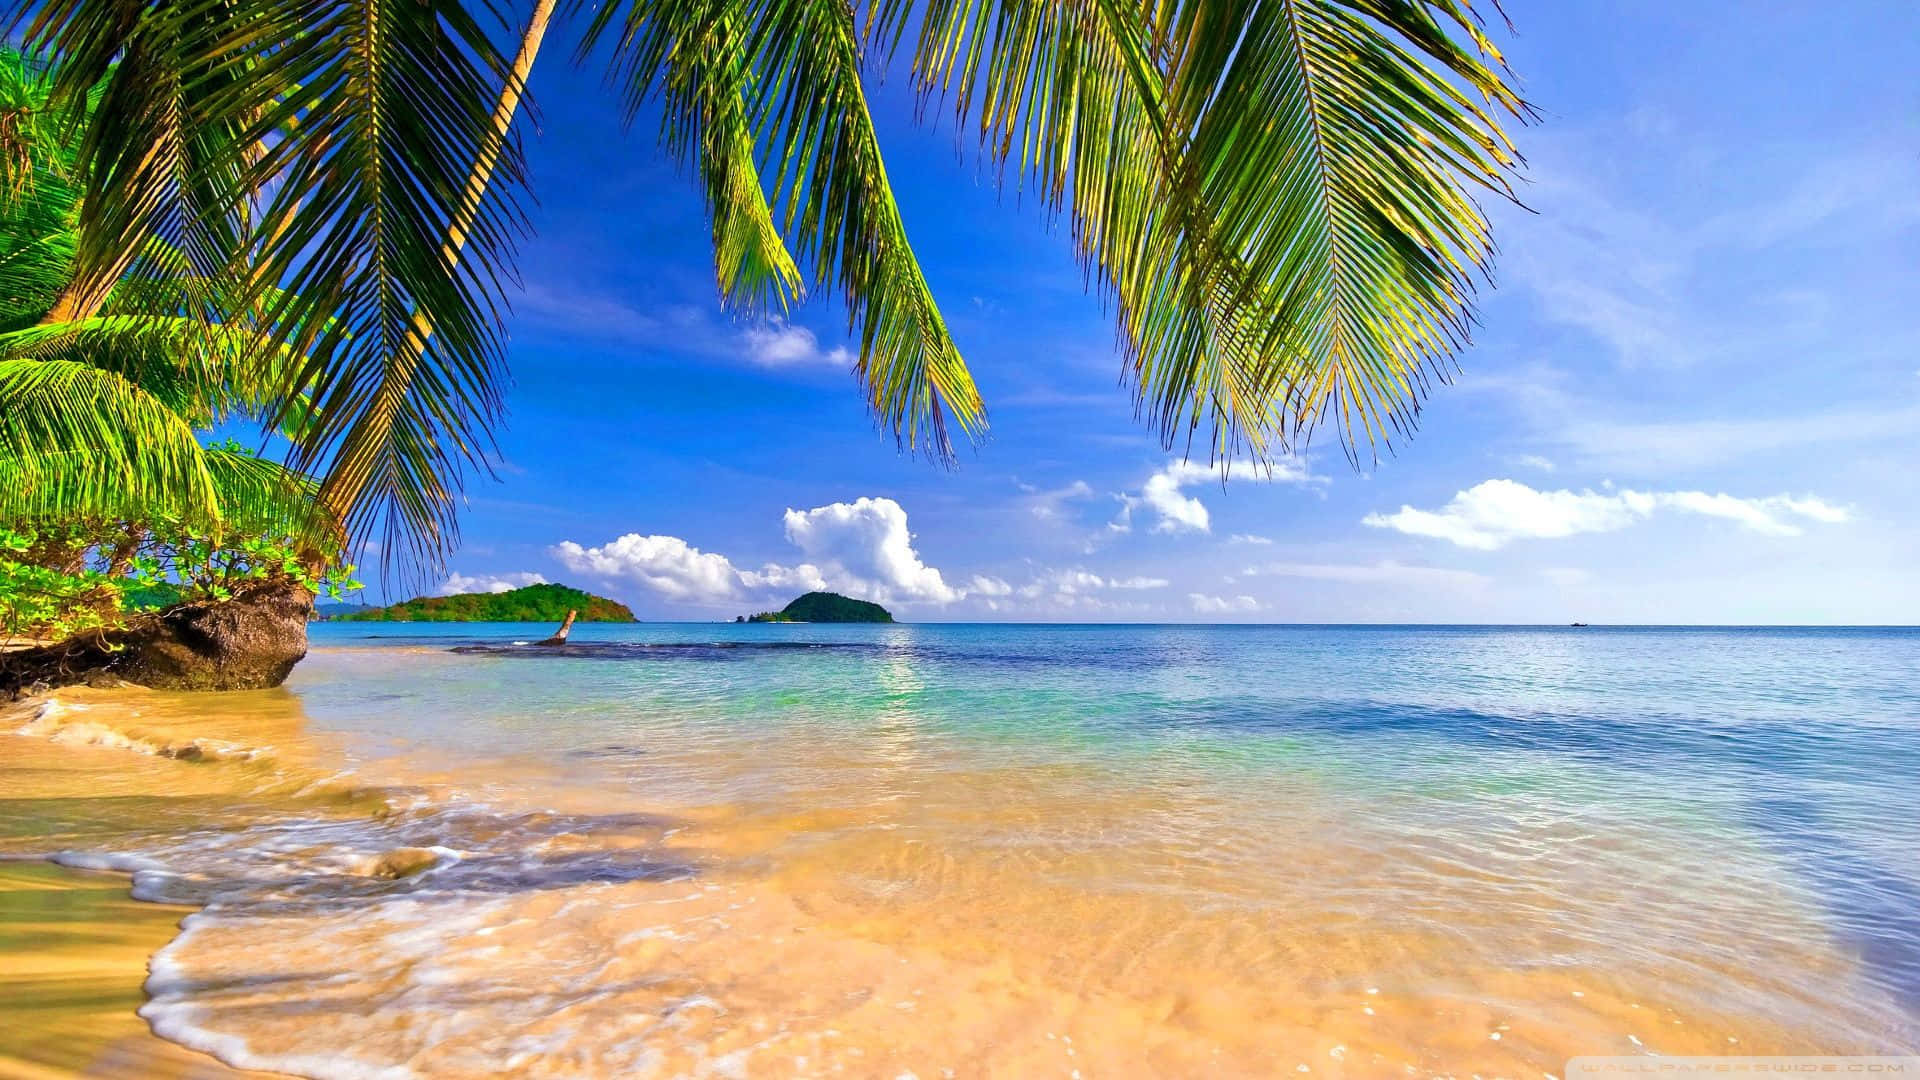 Download Relax and Unwind on a Beautiful Tropical Beach | Wallpapers.com